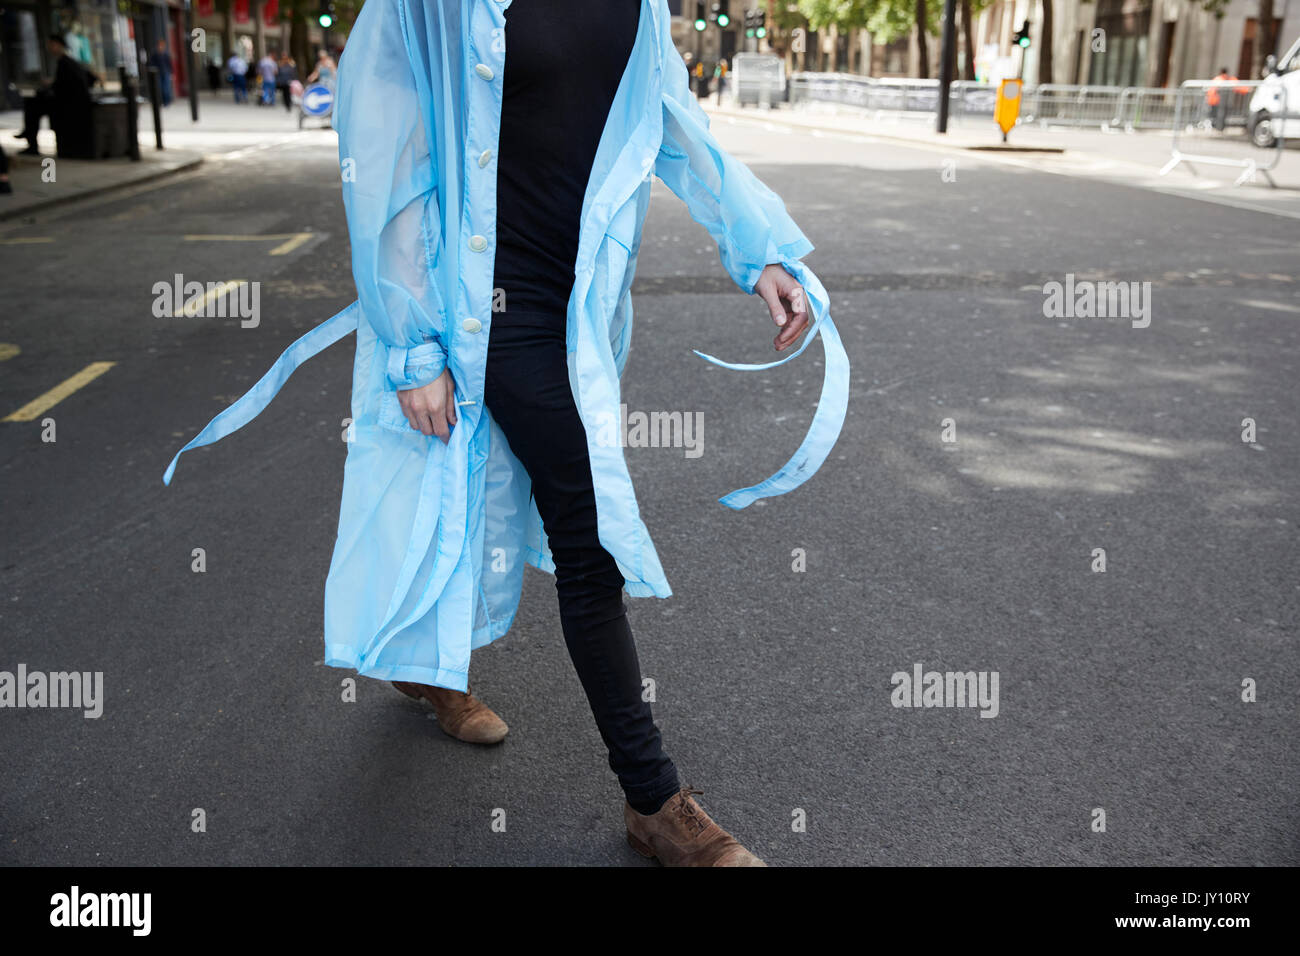 Man in black trousers and blue sheer coat walking in street Stock Photo